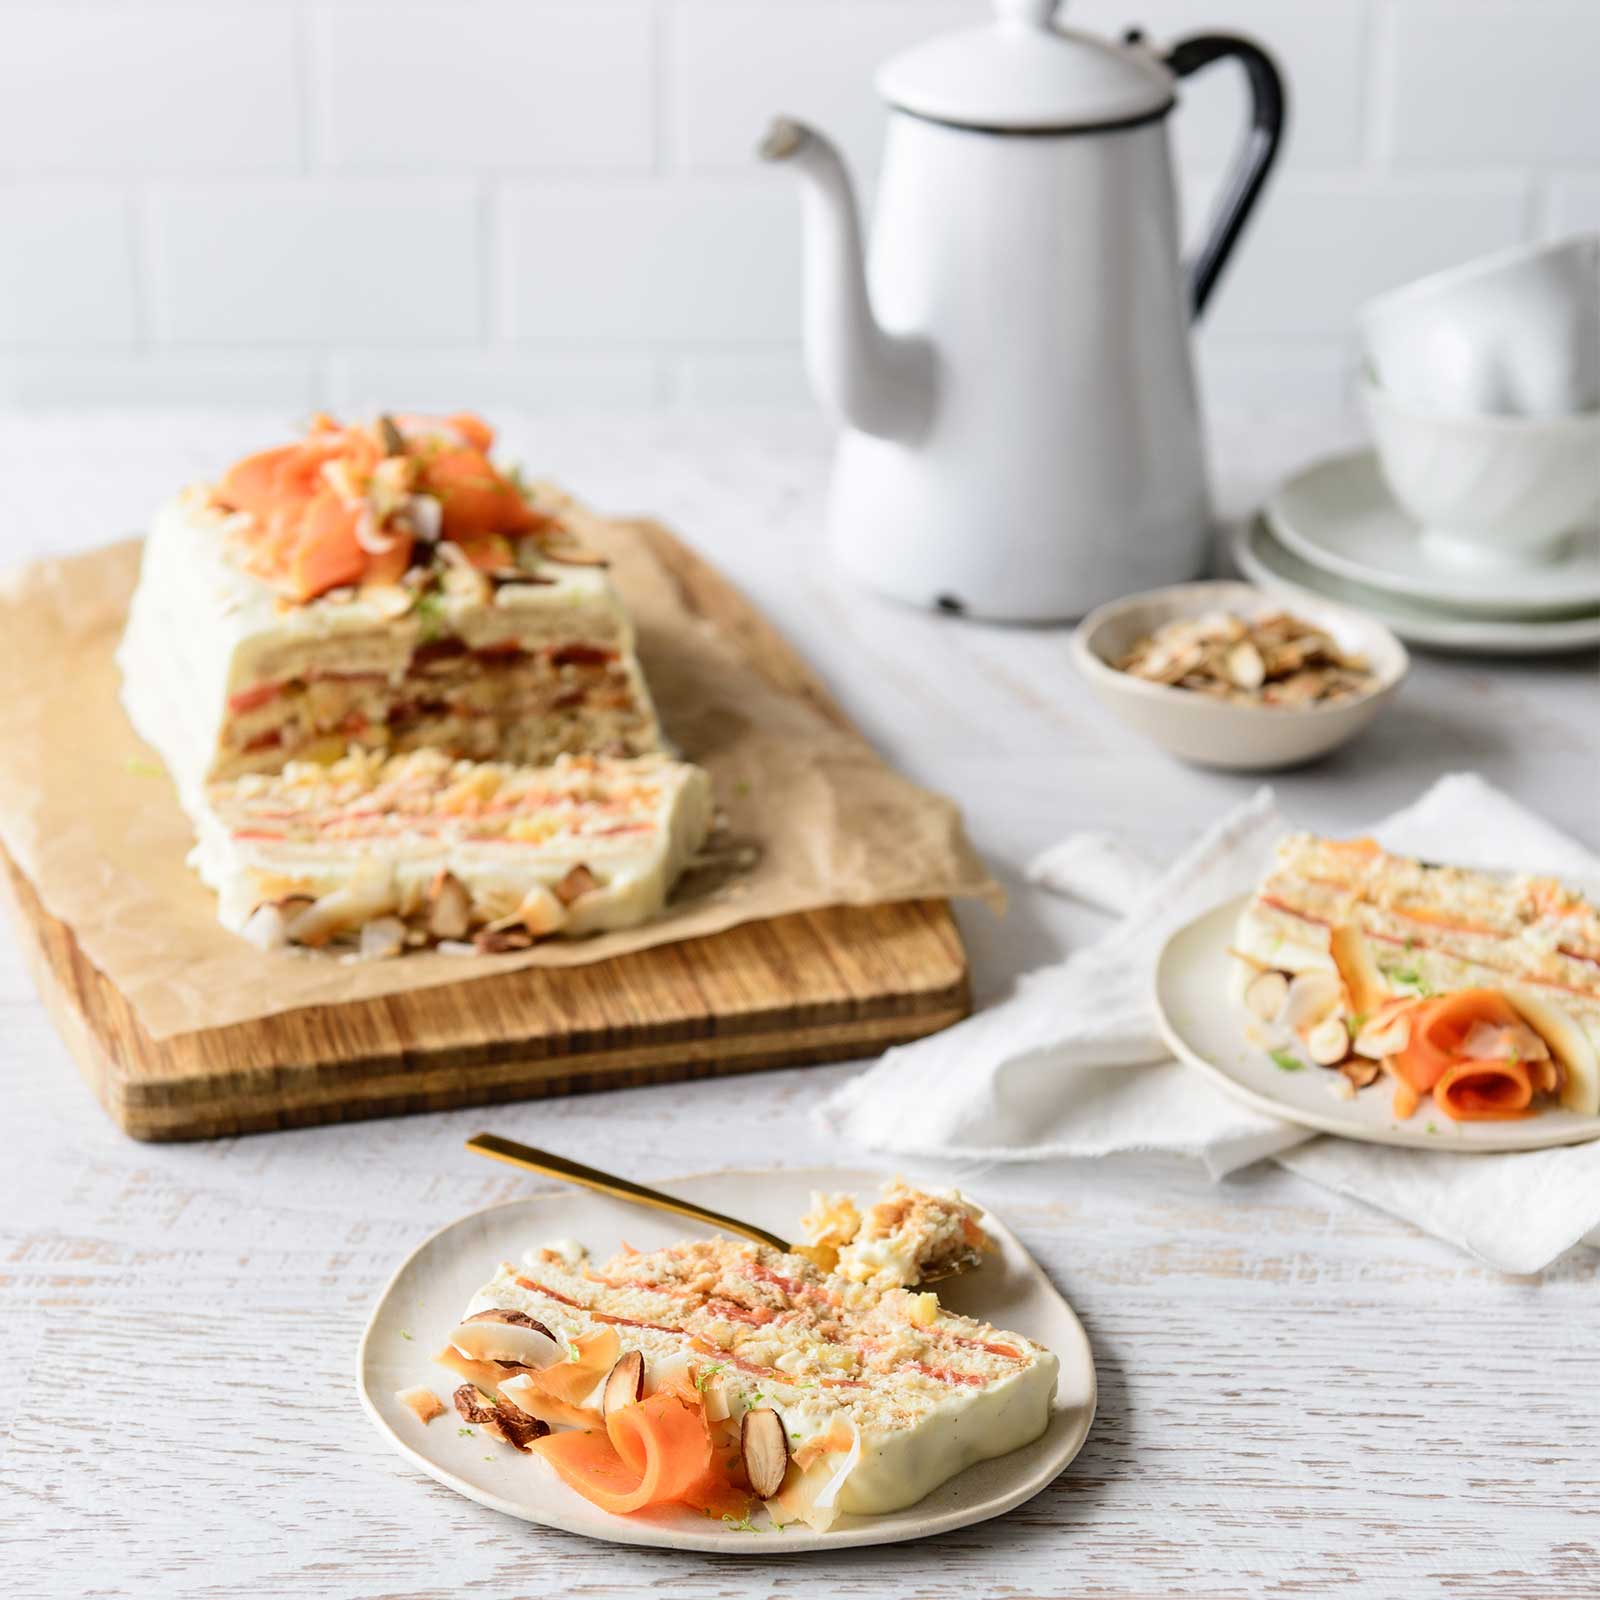 Gluten-free tropical papaya refrigerator cake sits on a wooden board at the back of the image. Two slices are sitting on places at the front of the board. At the back is a vintage enamel coffee pot awithnd cups and sauces.